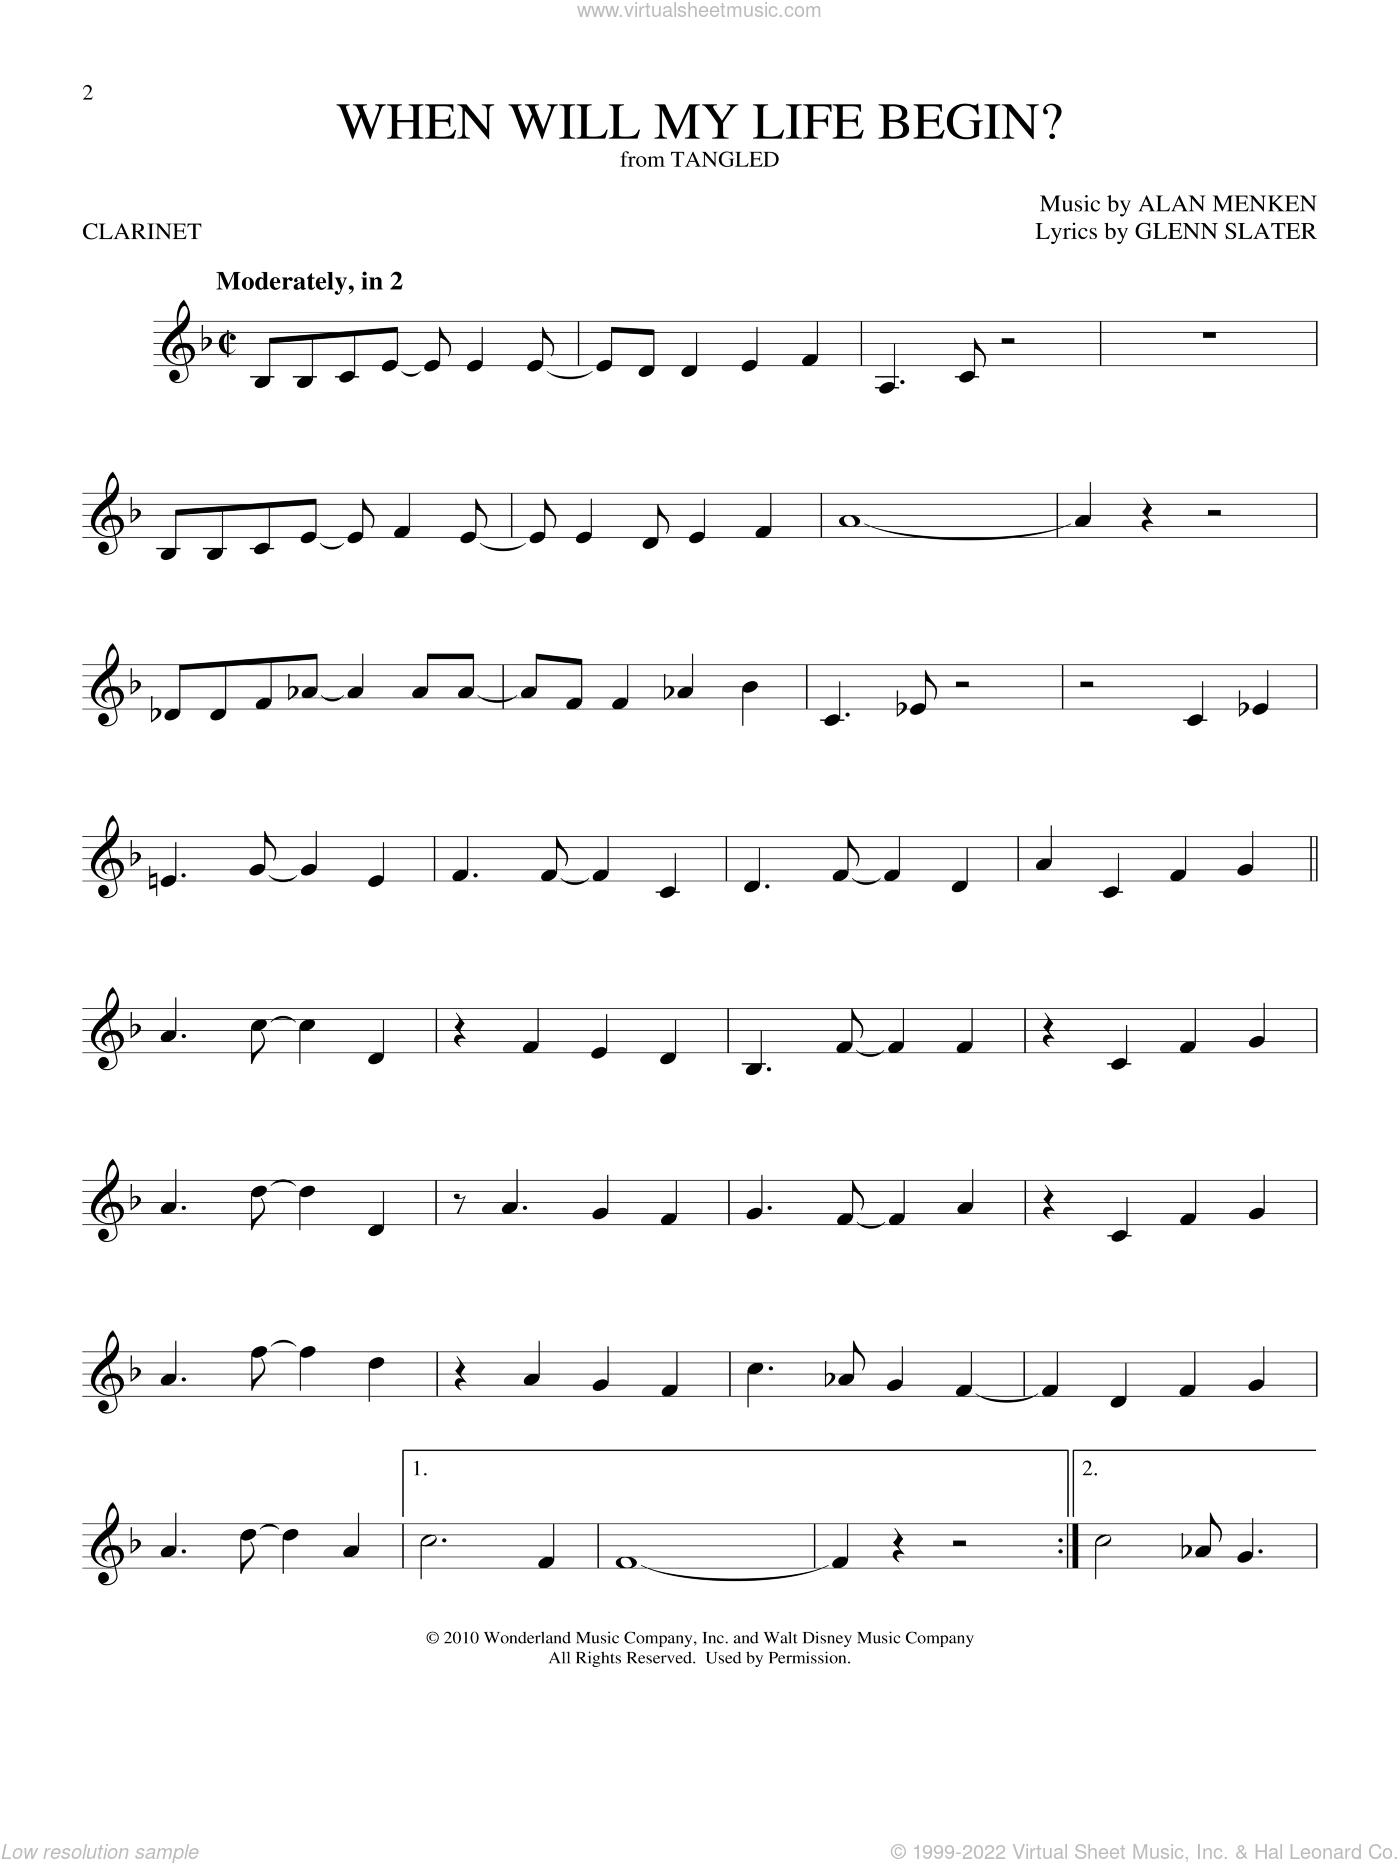 Moore - When Will My Life Begin? (from Disney's Tangled) sheet music